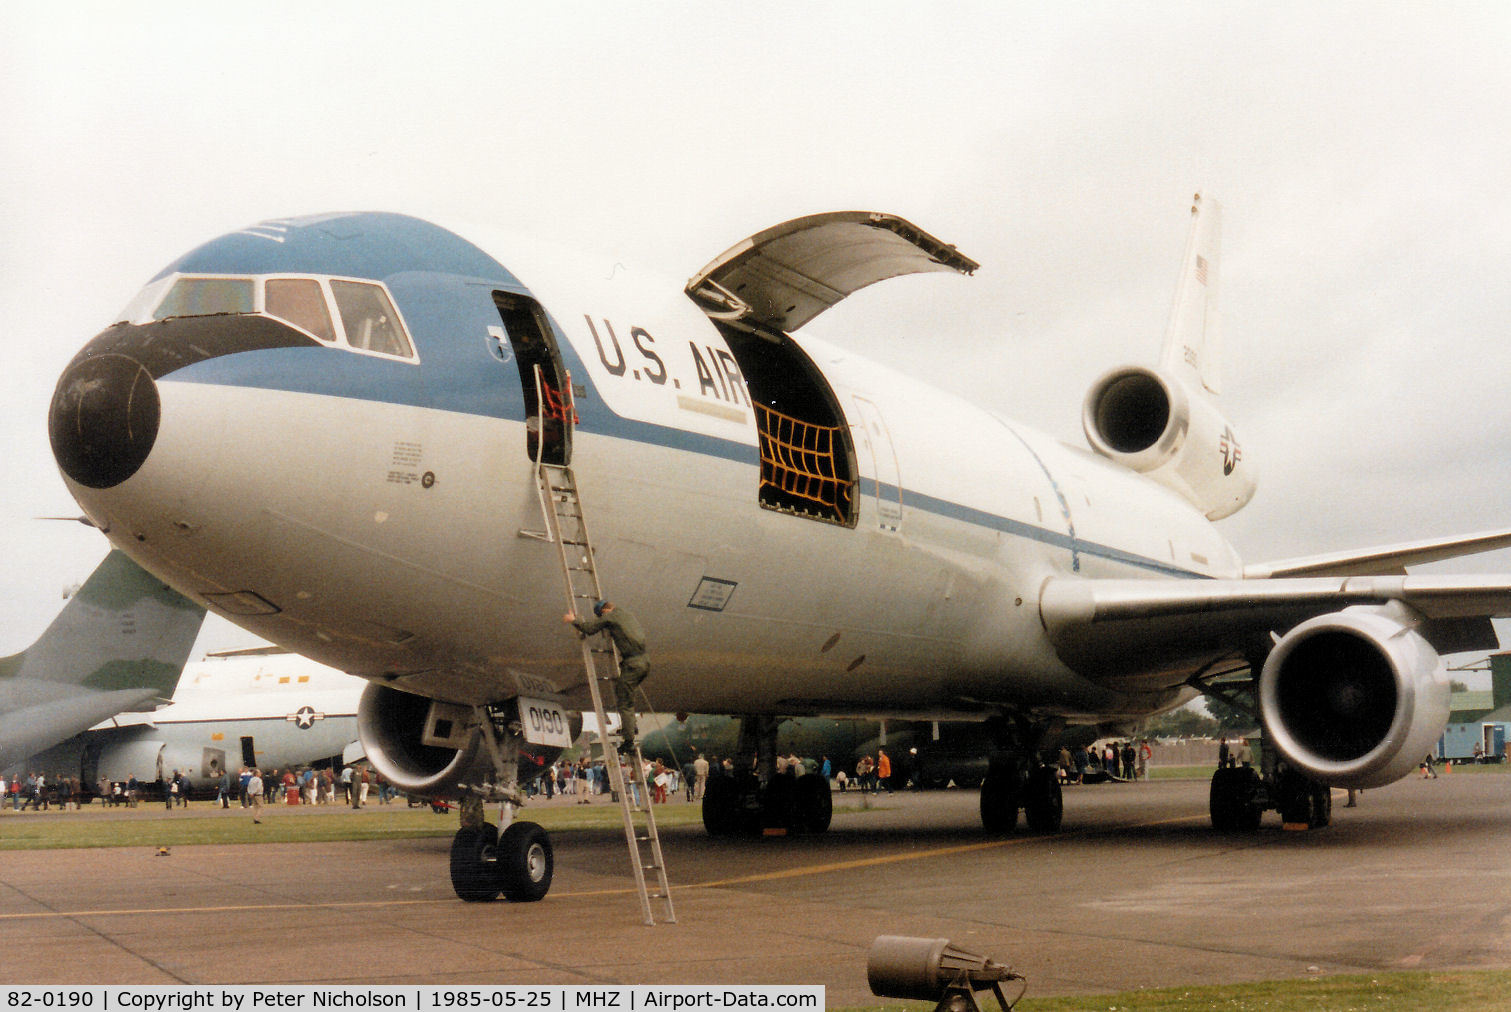 82-0190, 1982 McDonnell Douglas KC-10A Extender C/N 48212, Another view of the KC-10A Extender from Barksdale AFB's 2nd Bombardment  Wing on display at the 1985 RAF Mildenhall Air Fete.